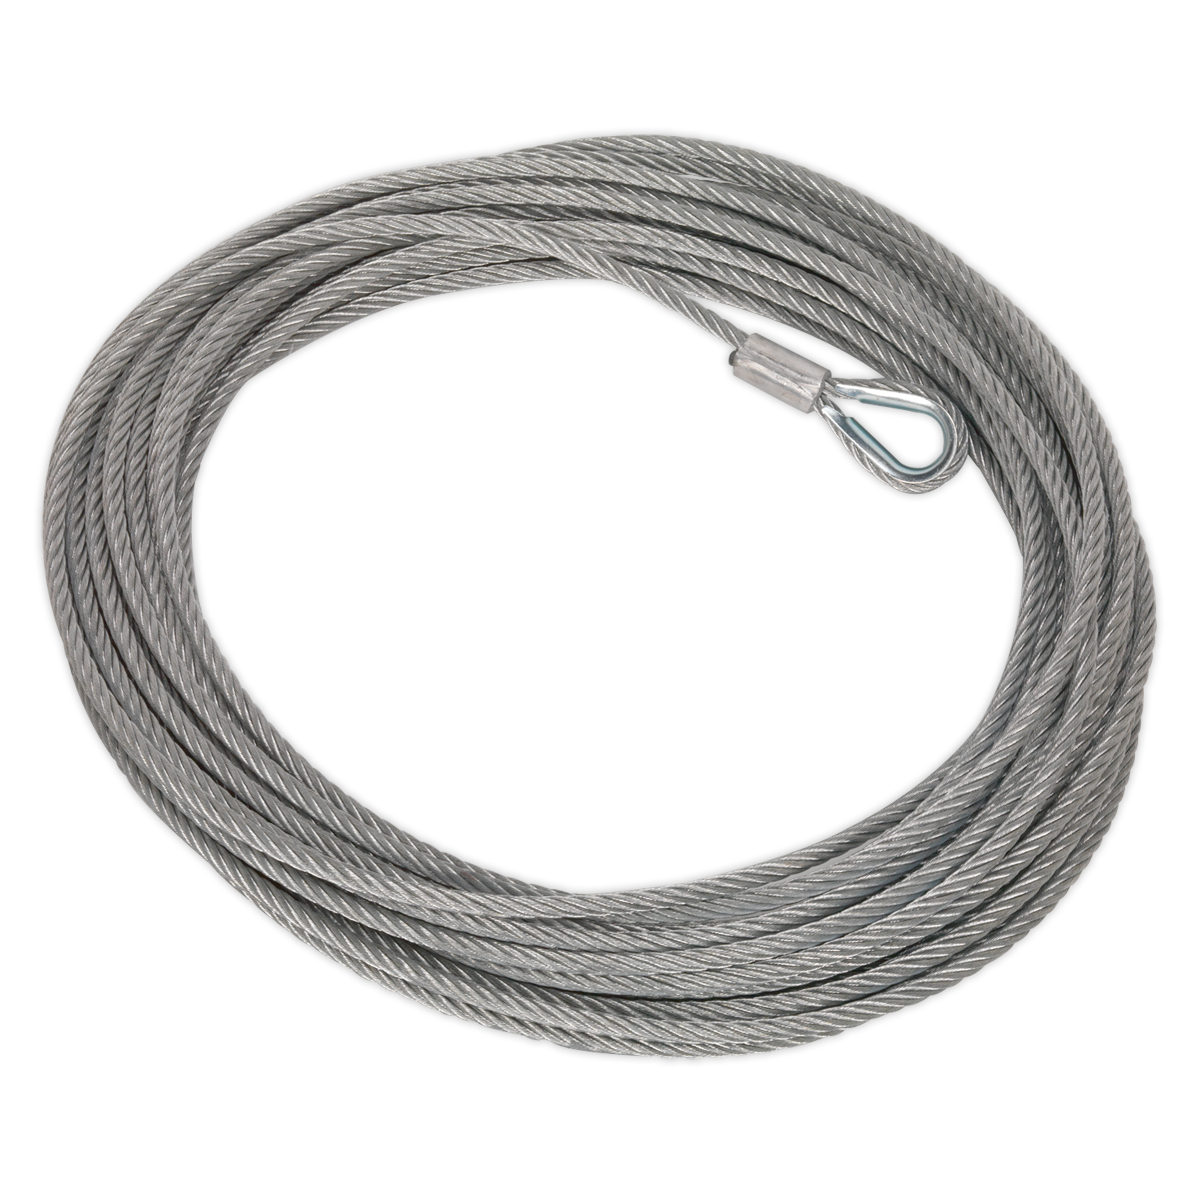 Wire Rope (Ø10.3mm x 29m) for RW5675